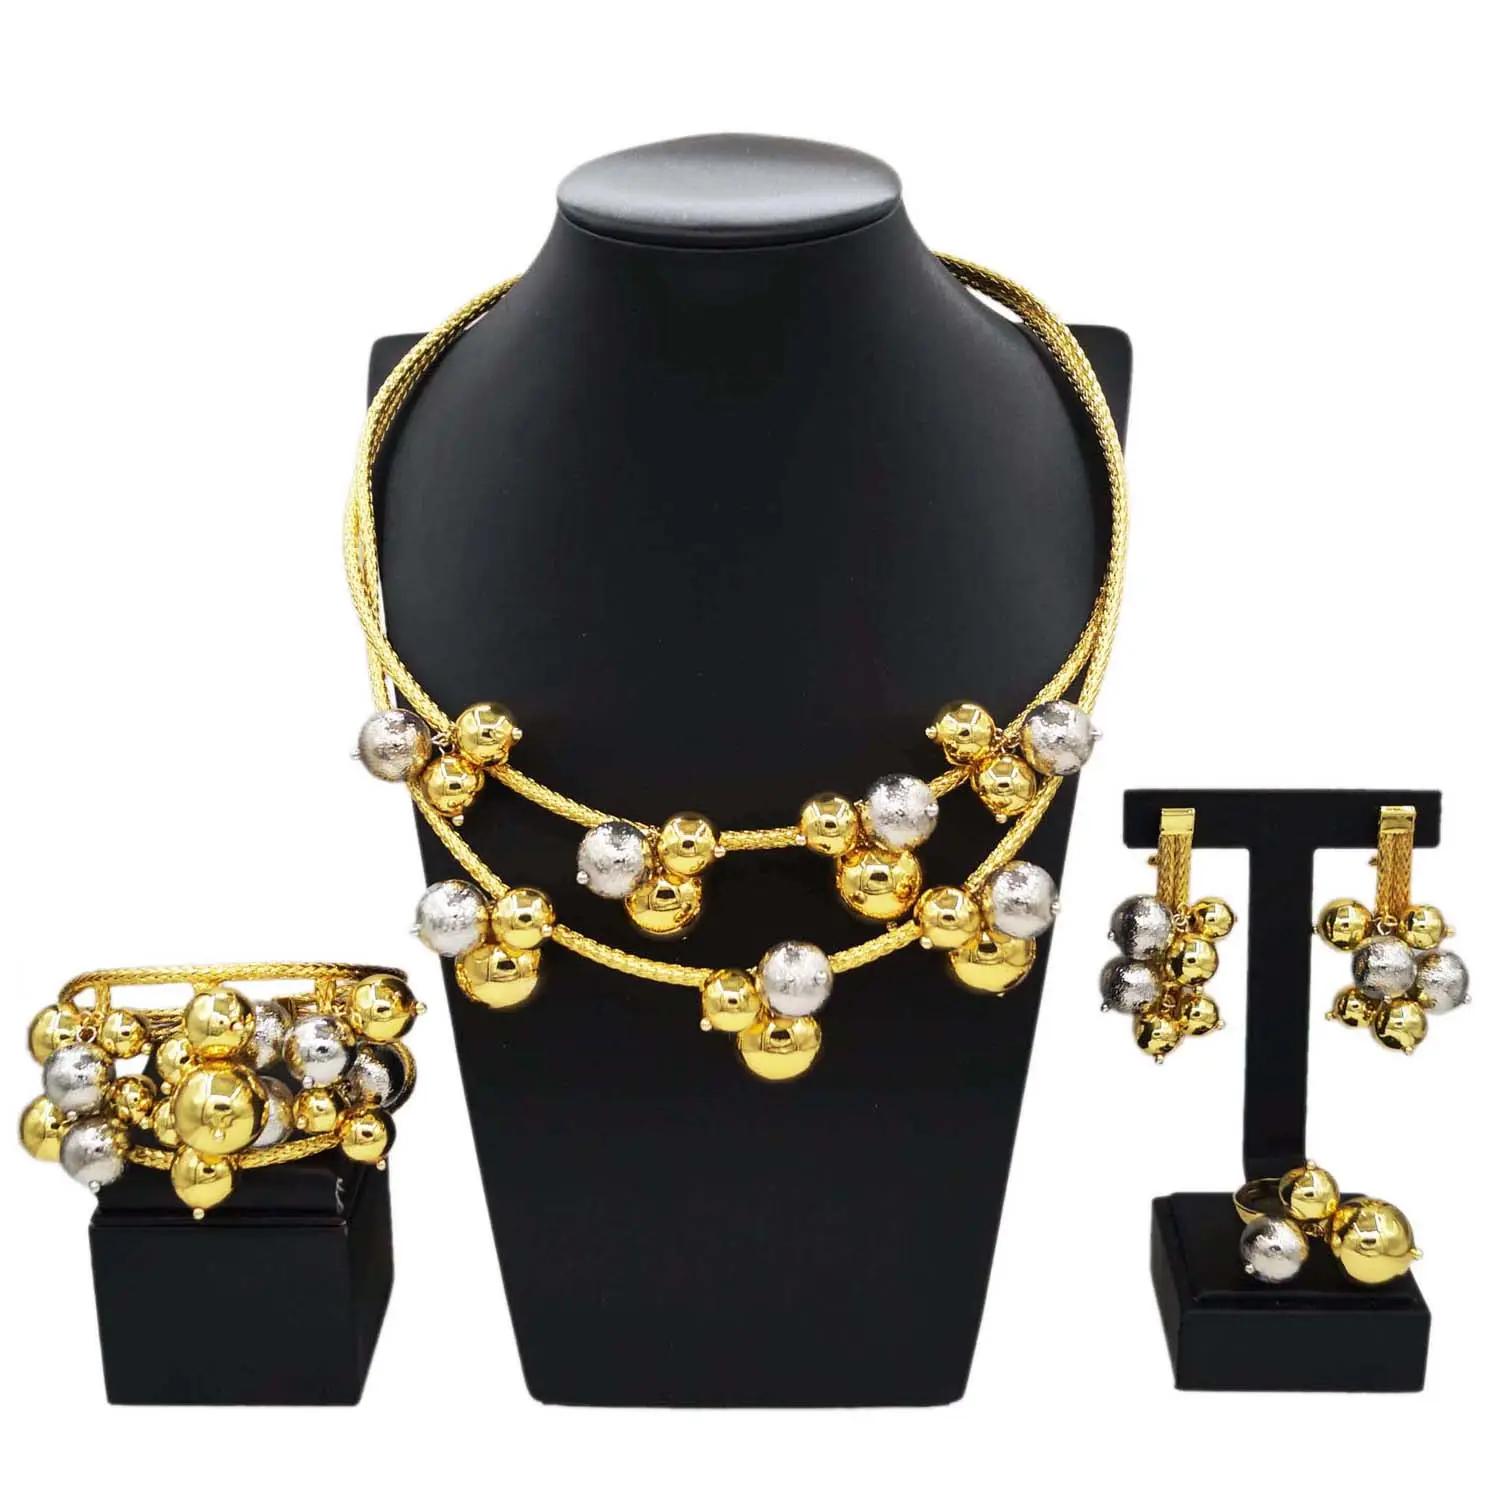 Latest Hot Sale Popular Wedding Party Gift Birthday Brasil Dubai Jewels Gold Plated necklace bracelet earrings ring jewelry